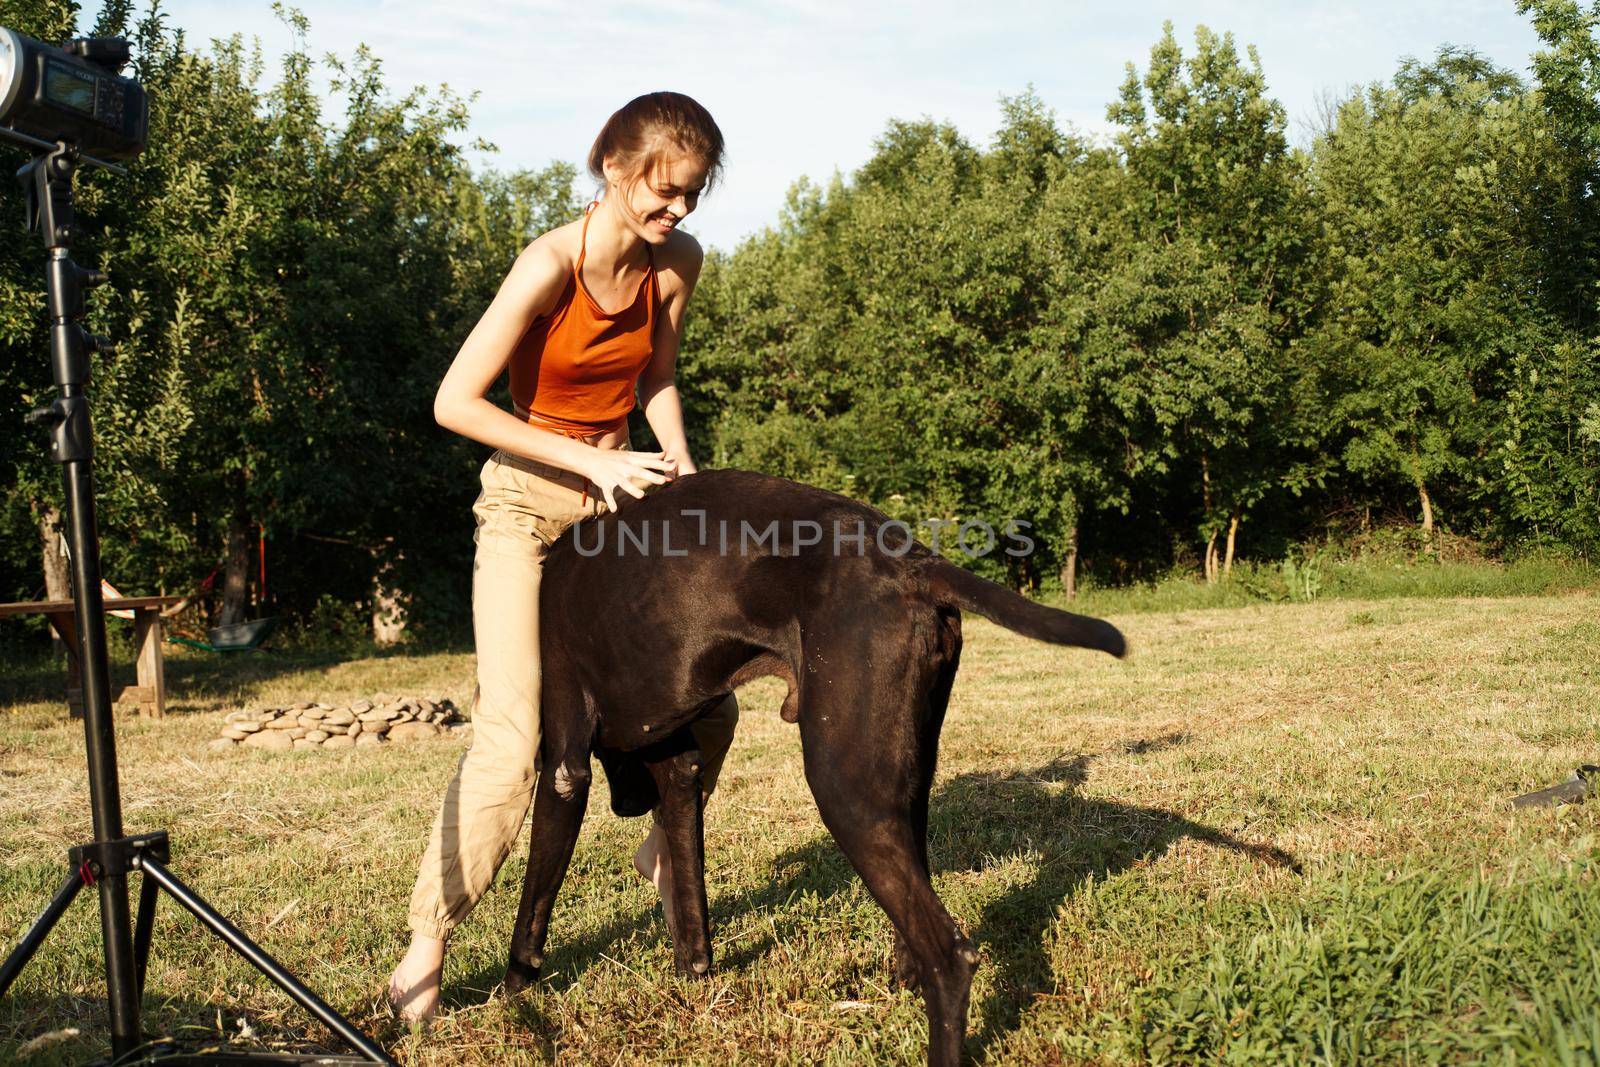 cheerful woman playing dog outdoors in the field of friendship. High quality photo